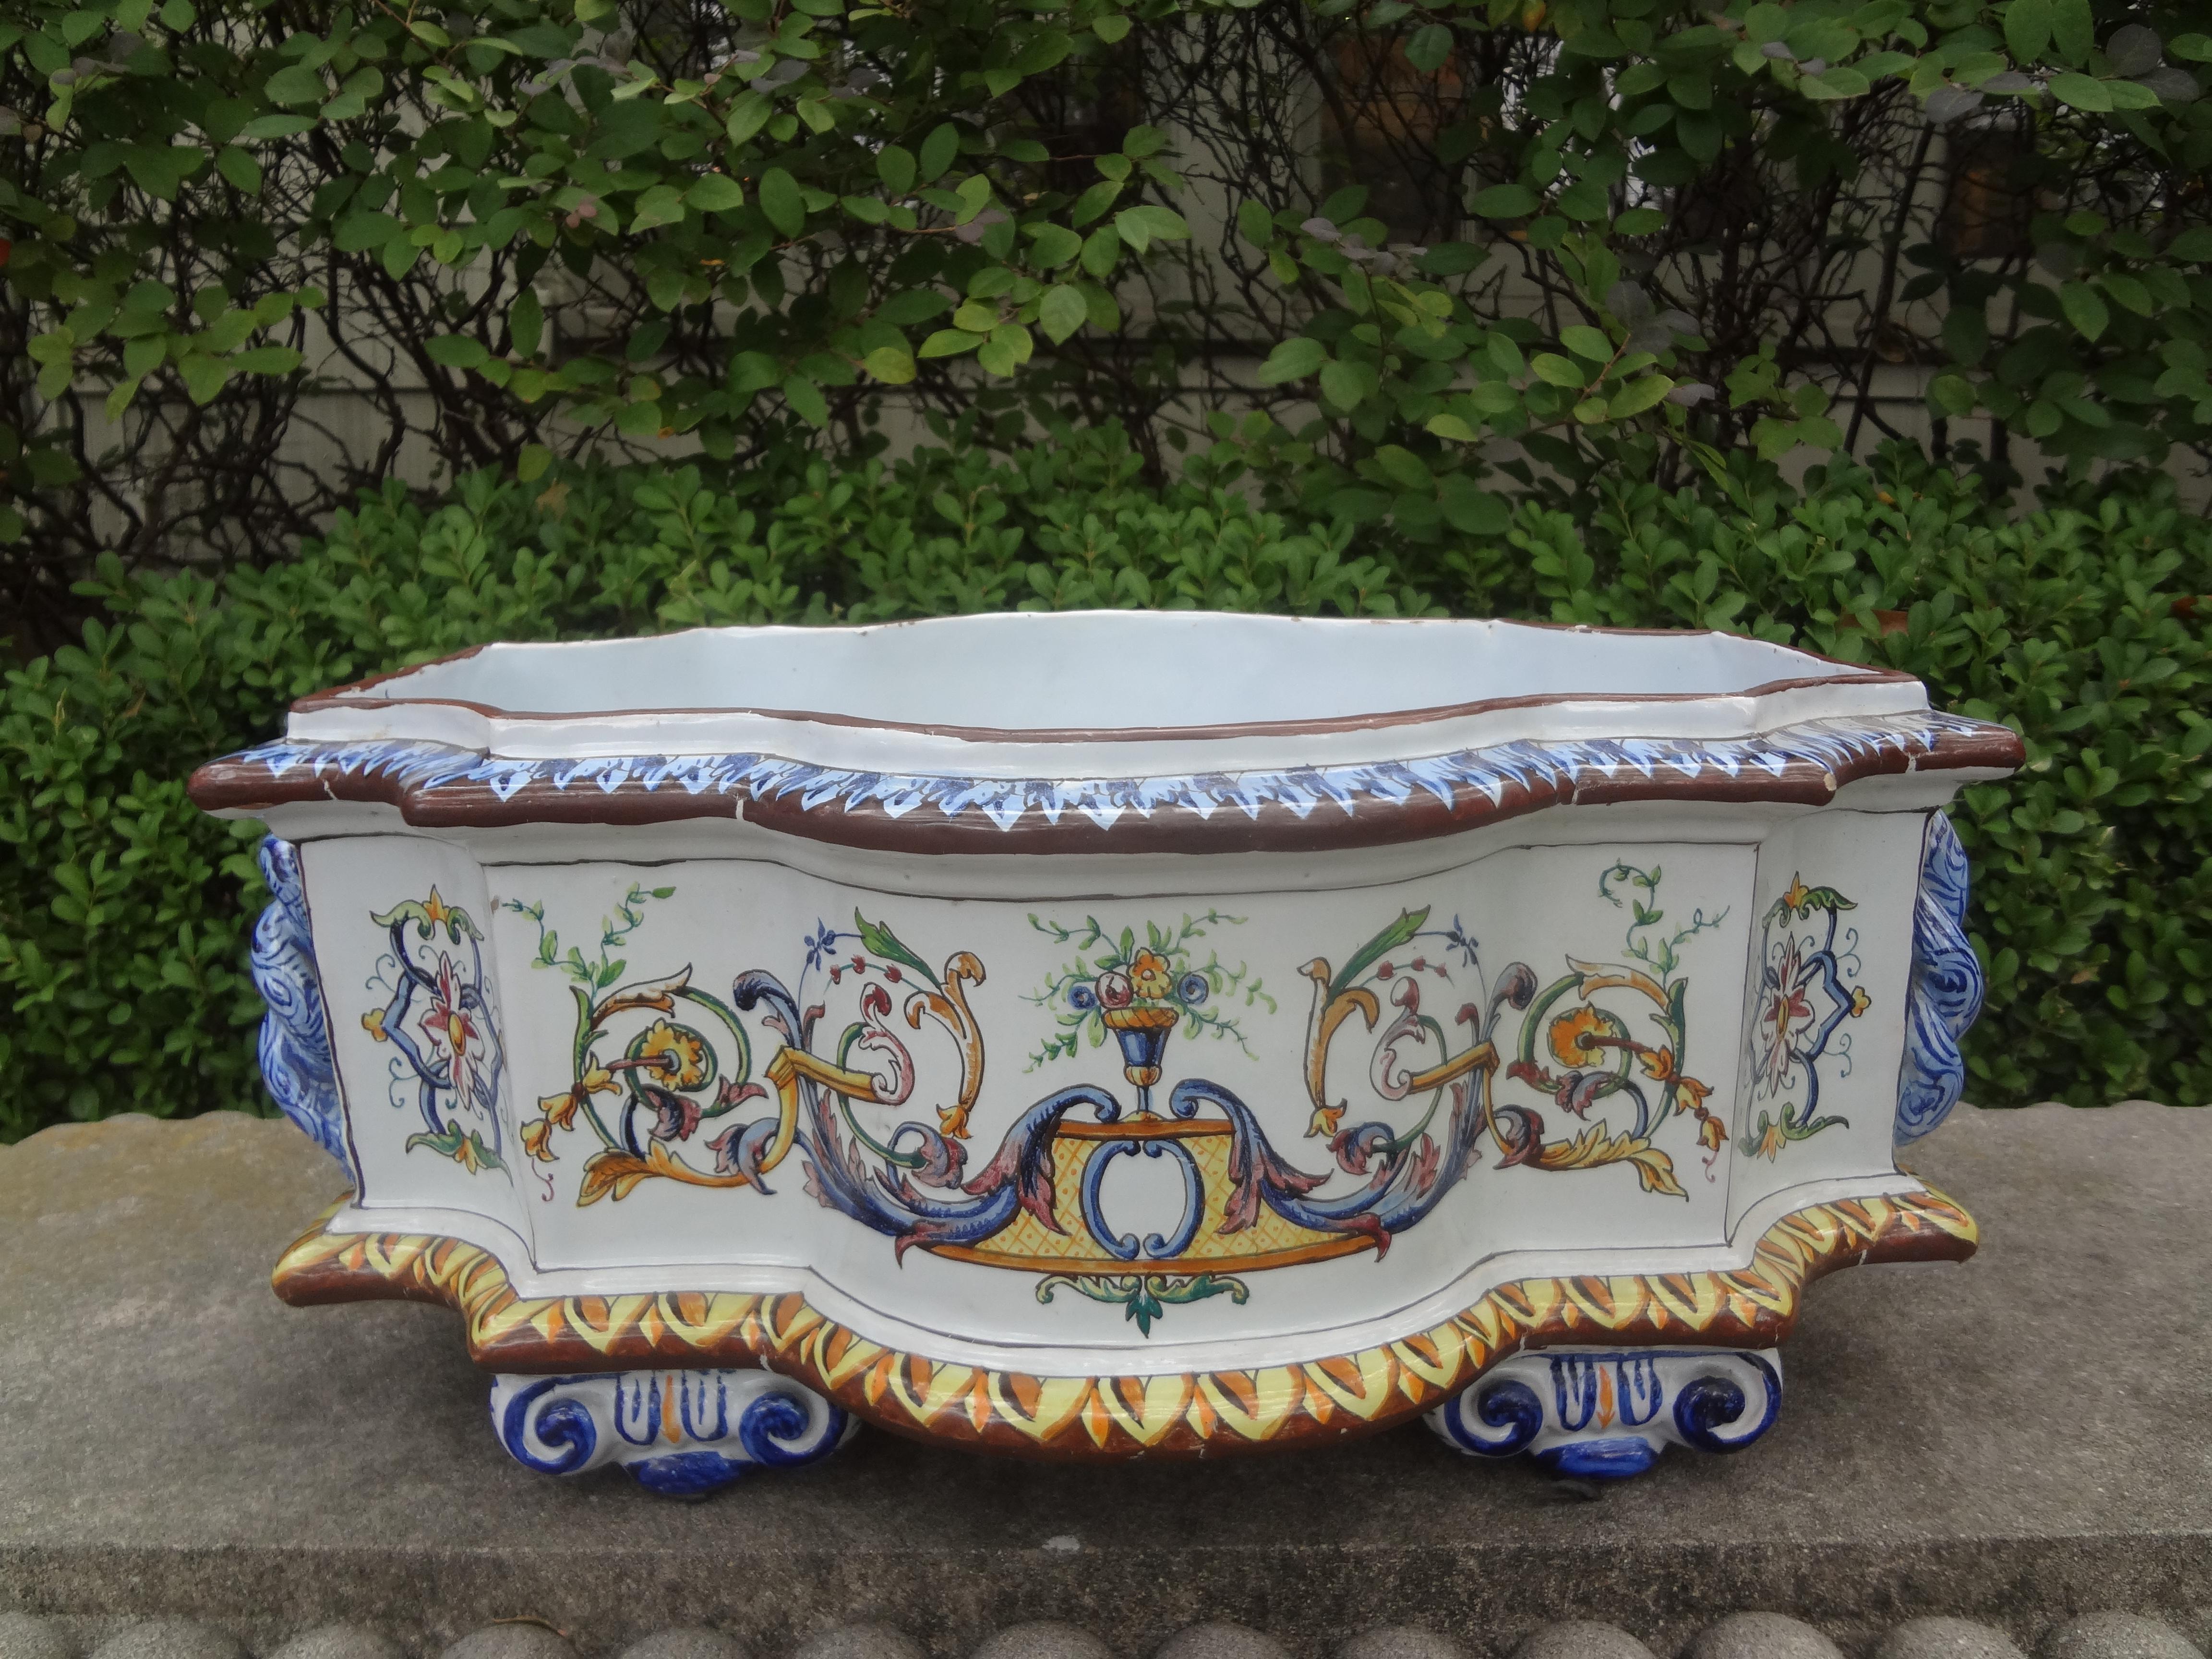 French hand painted faience jardiniere or cachepot. 
This beautiful hand decorated French faience planter, jardiniere or cachepot is the perfect centerpiece for a dining table, coffee table or kitchen. In the style of Gien, Quimper, Nevers and